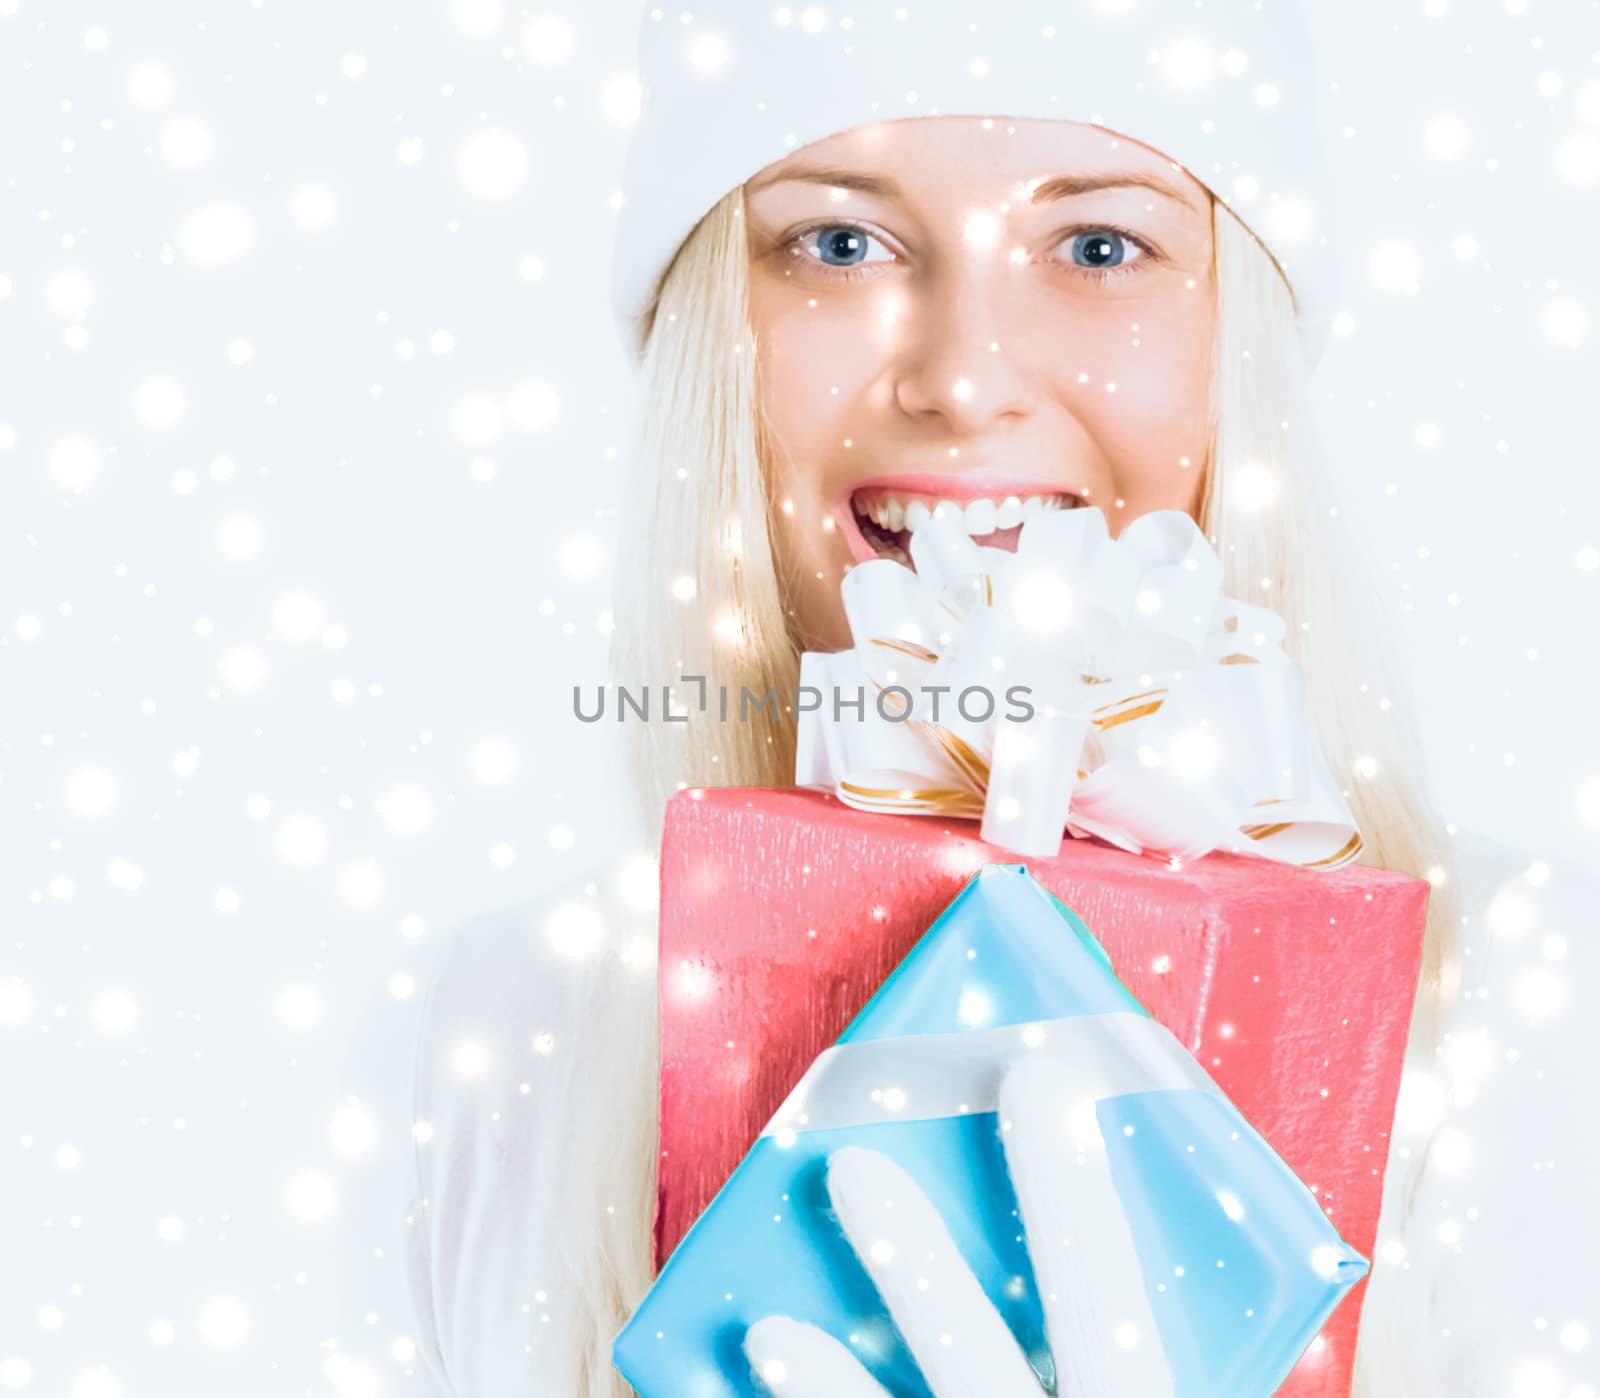 Young woman celebrating Christmas time, happy smile by Anneleven